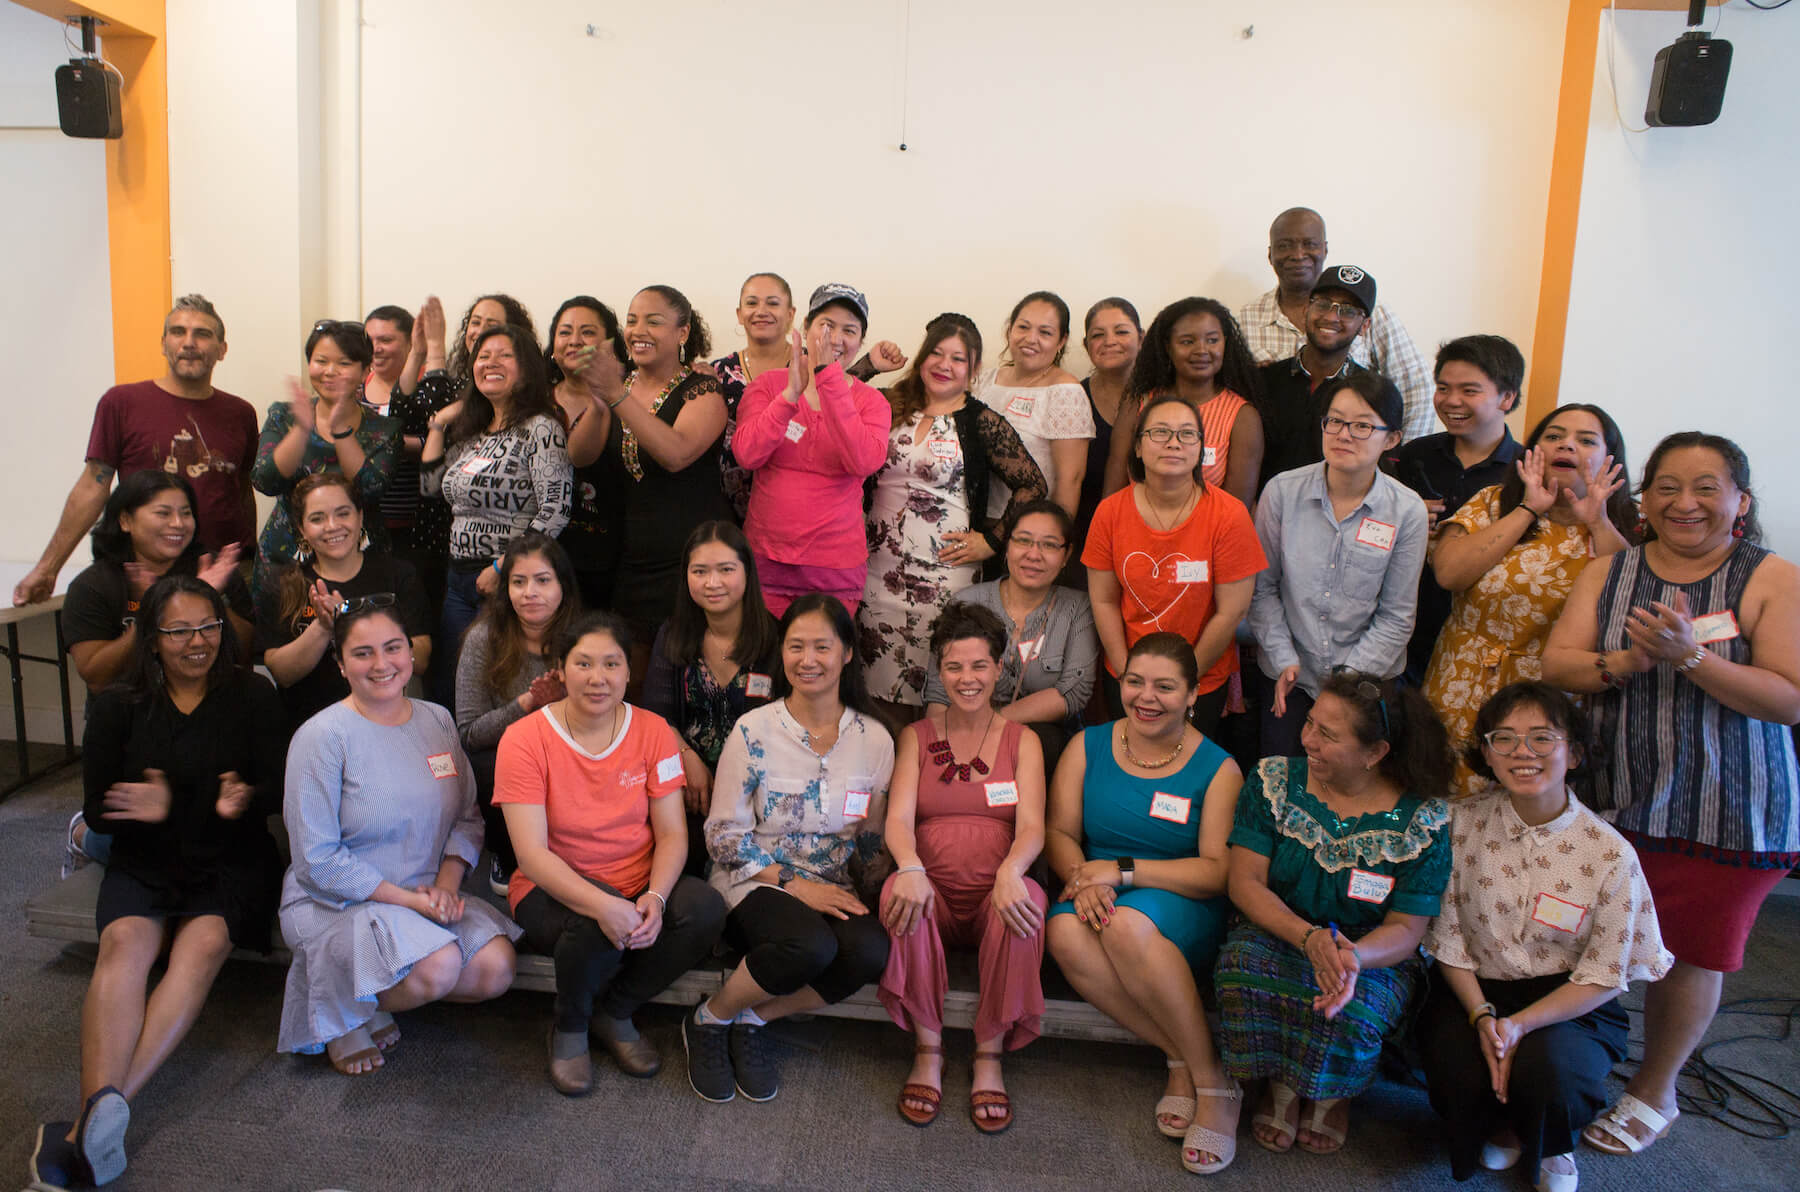 A group photo of the Immigrant Parent Voting Collaborative, which includes many Asian and Latina women.